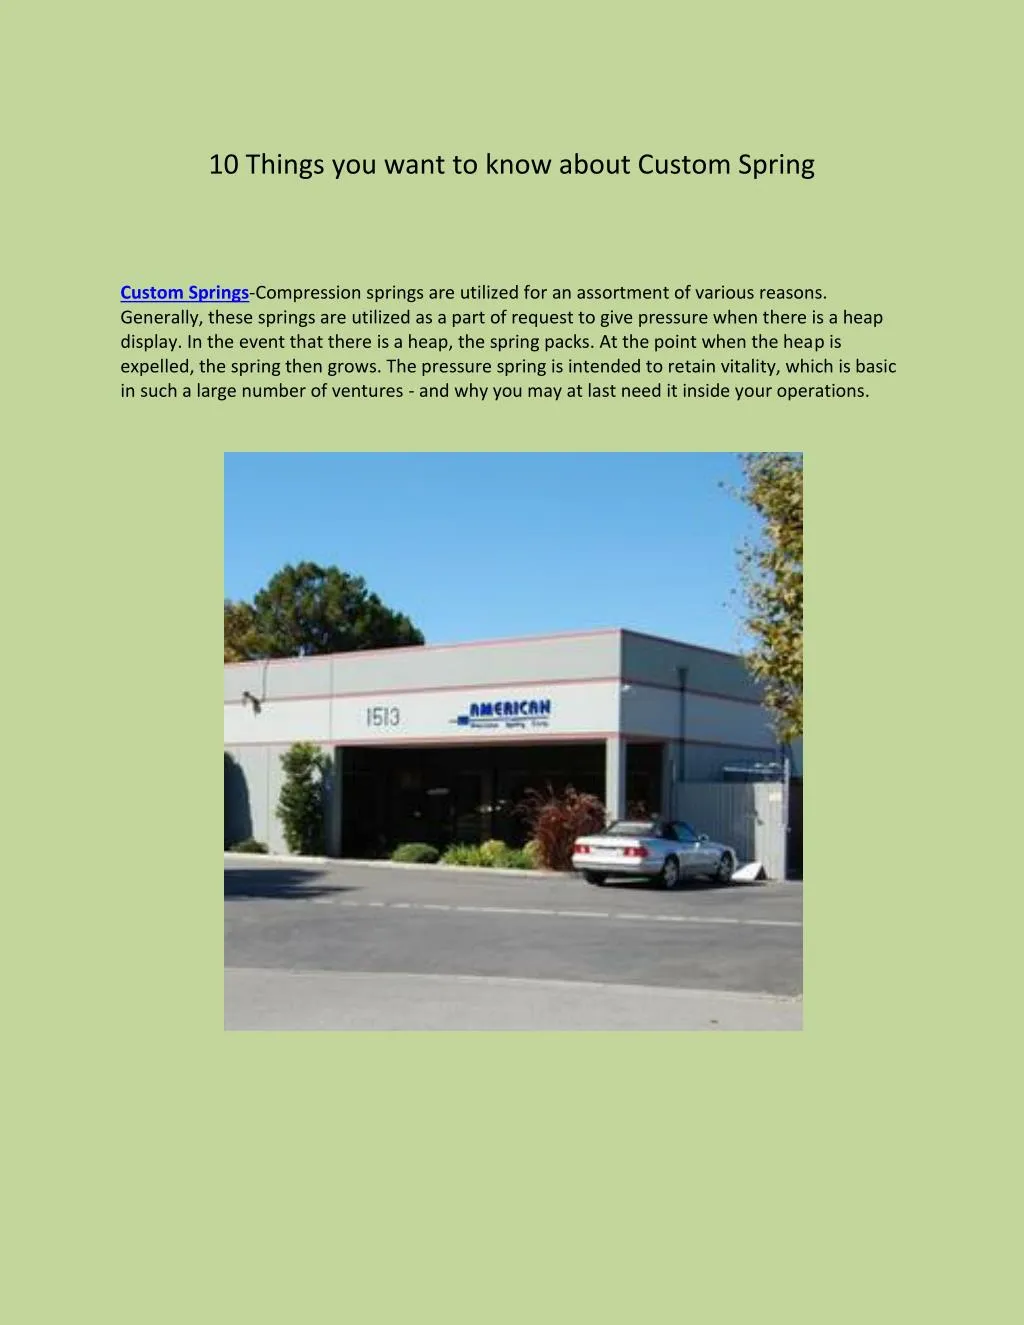 10 things you want to know about custom spring